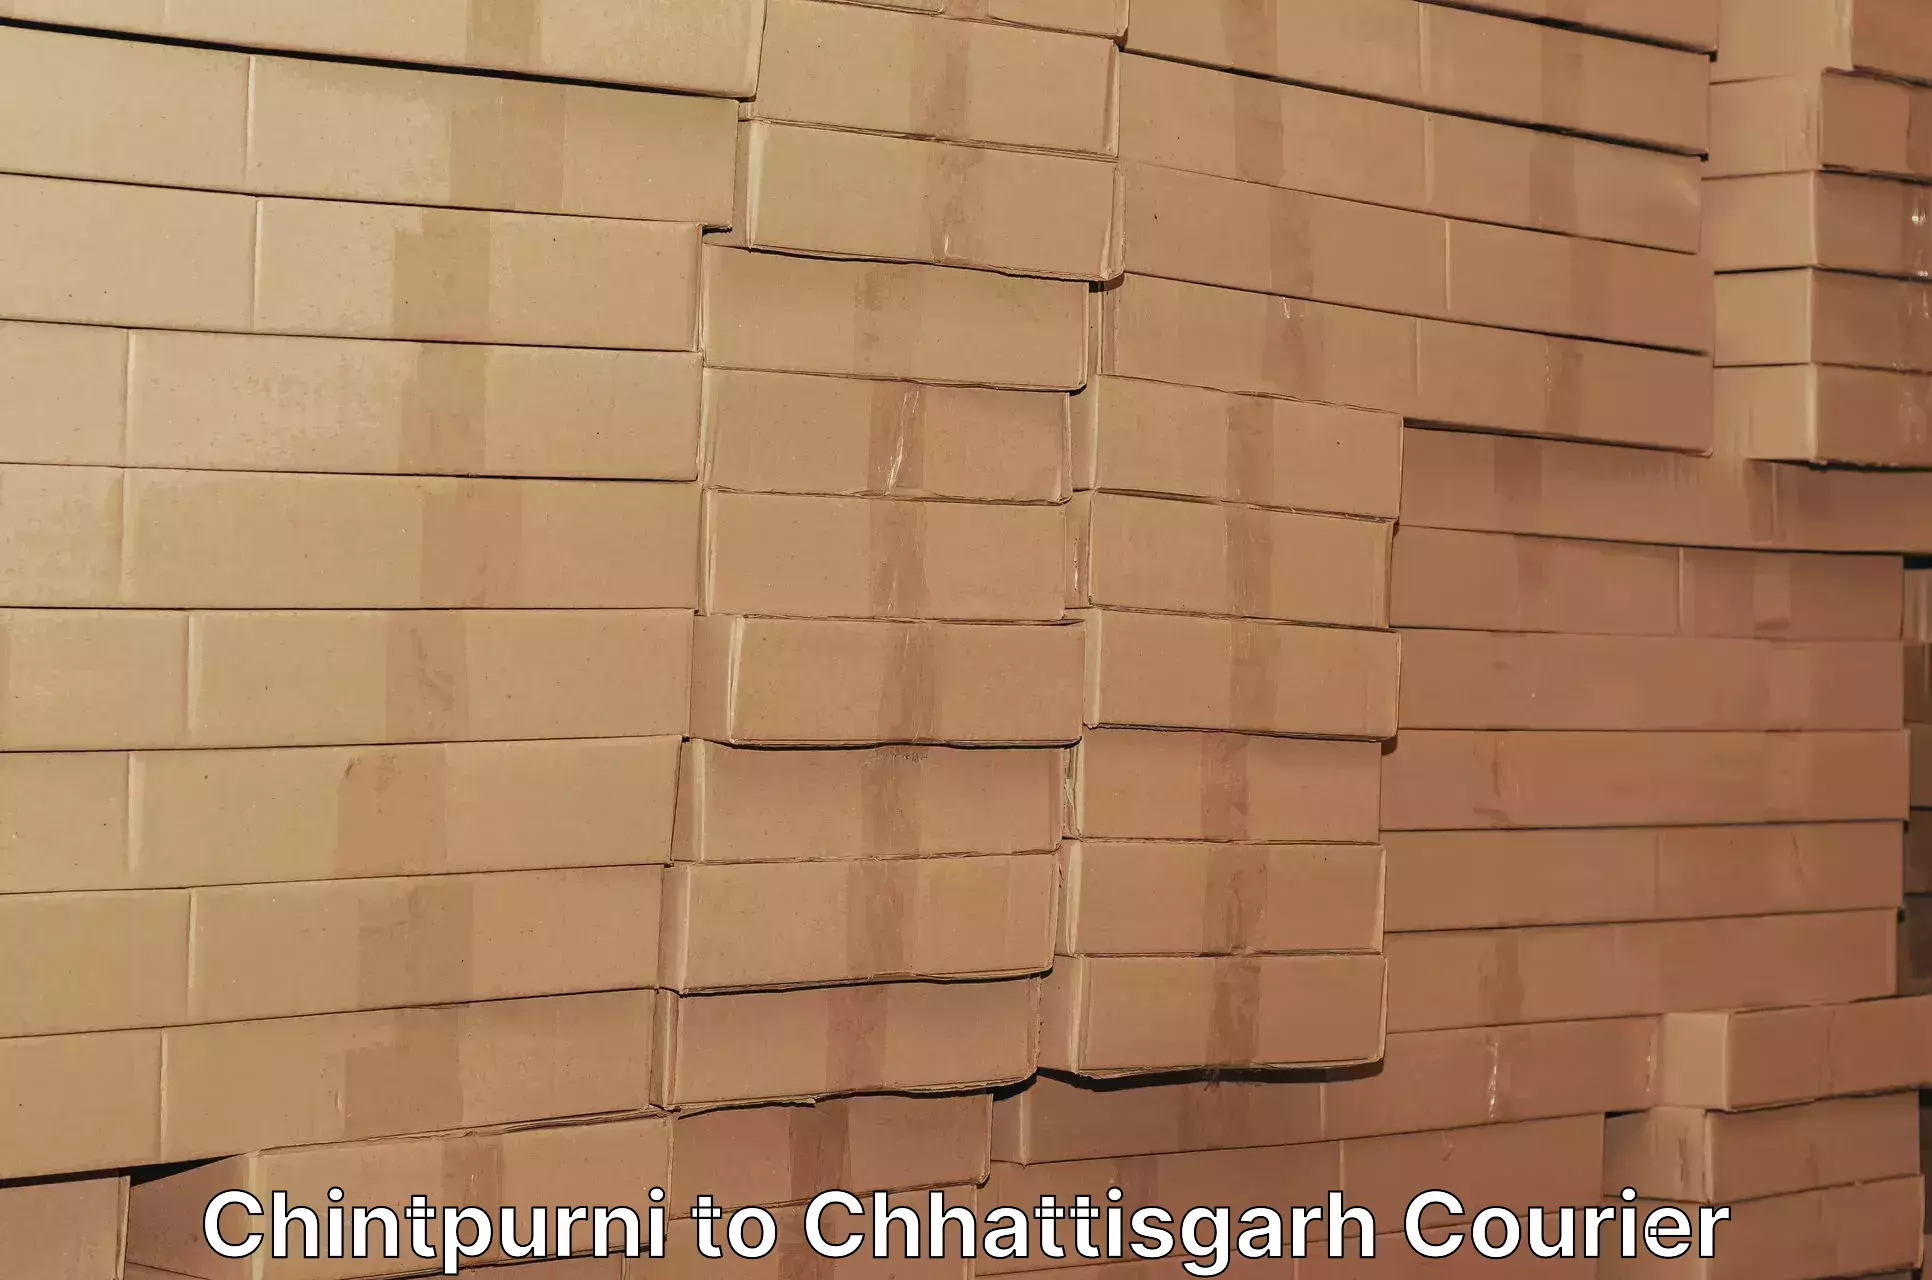 Courier service booking in Chintpurni to Surajpur